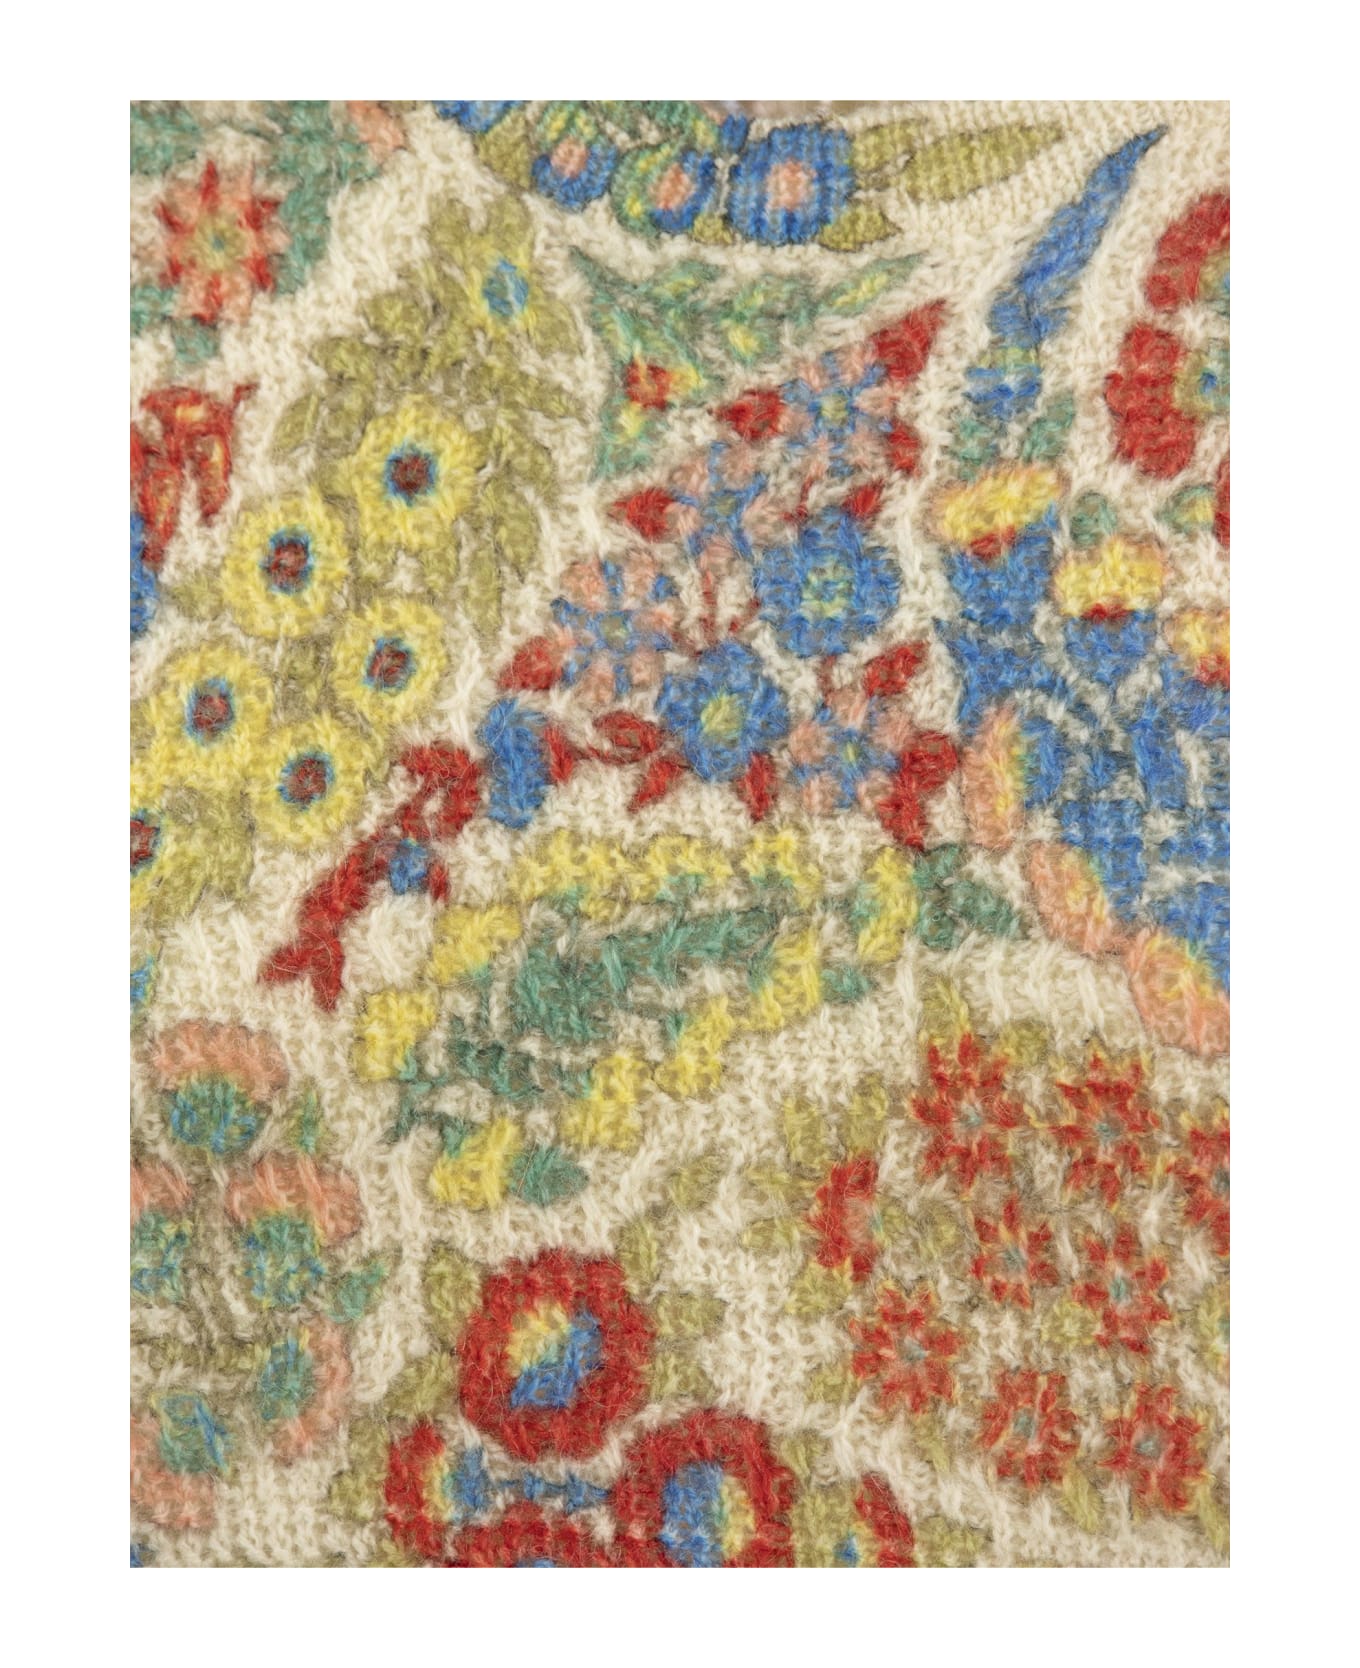 Etro Wool And Alpaca Jumper With Print - Multicolor